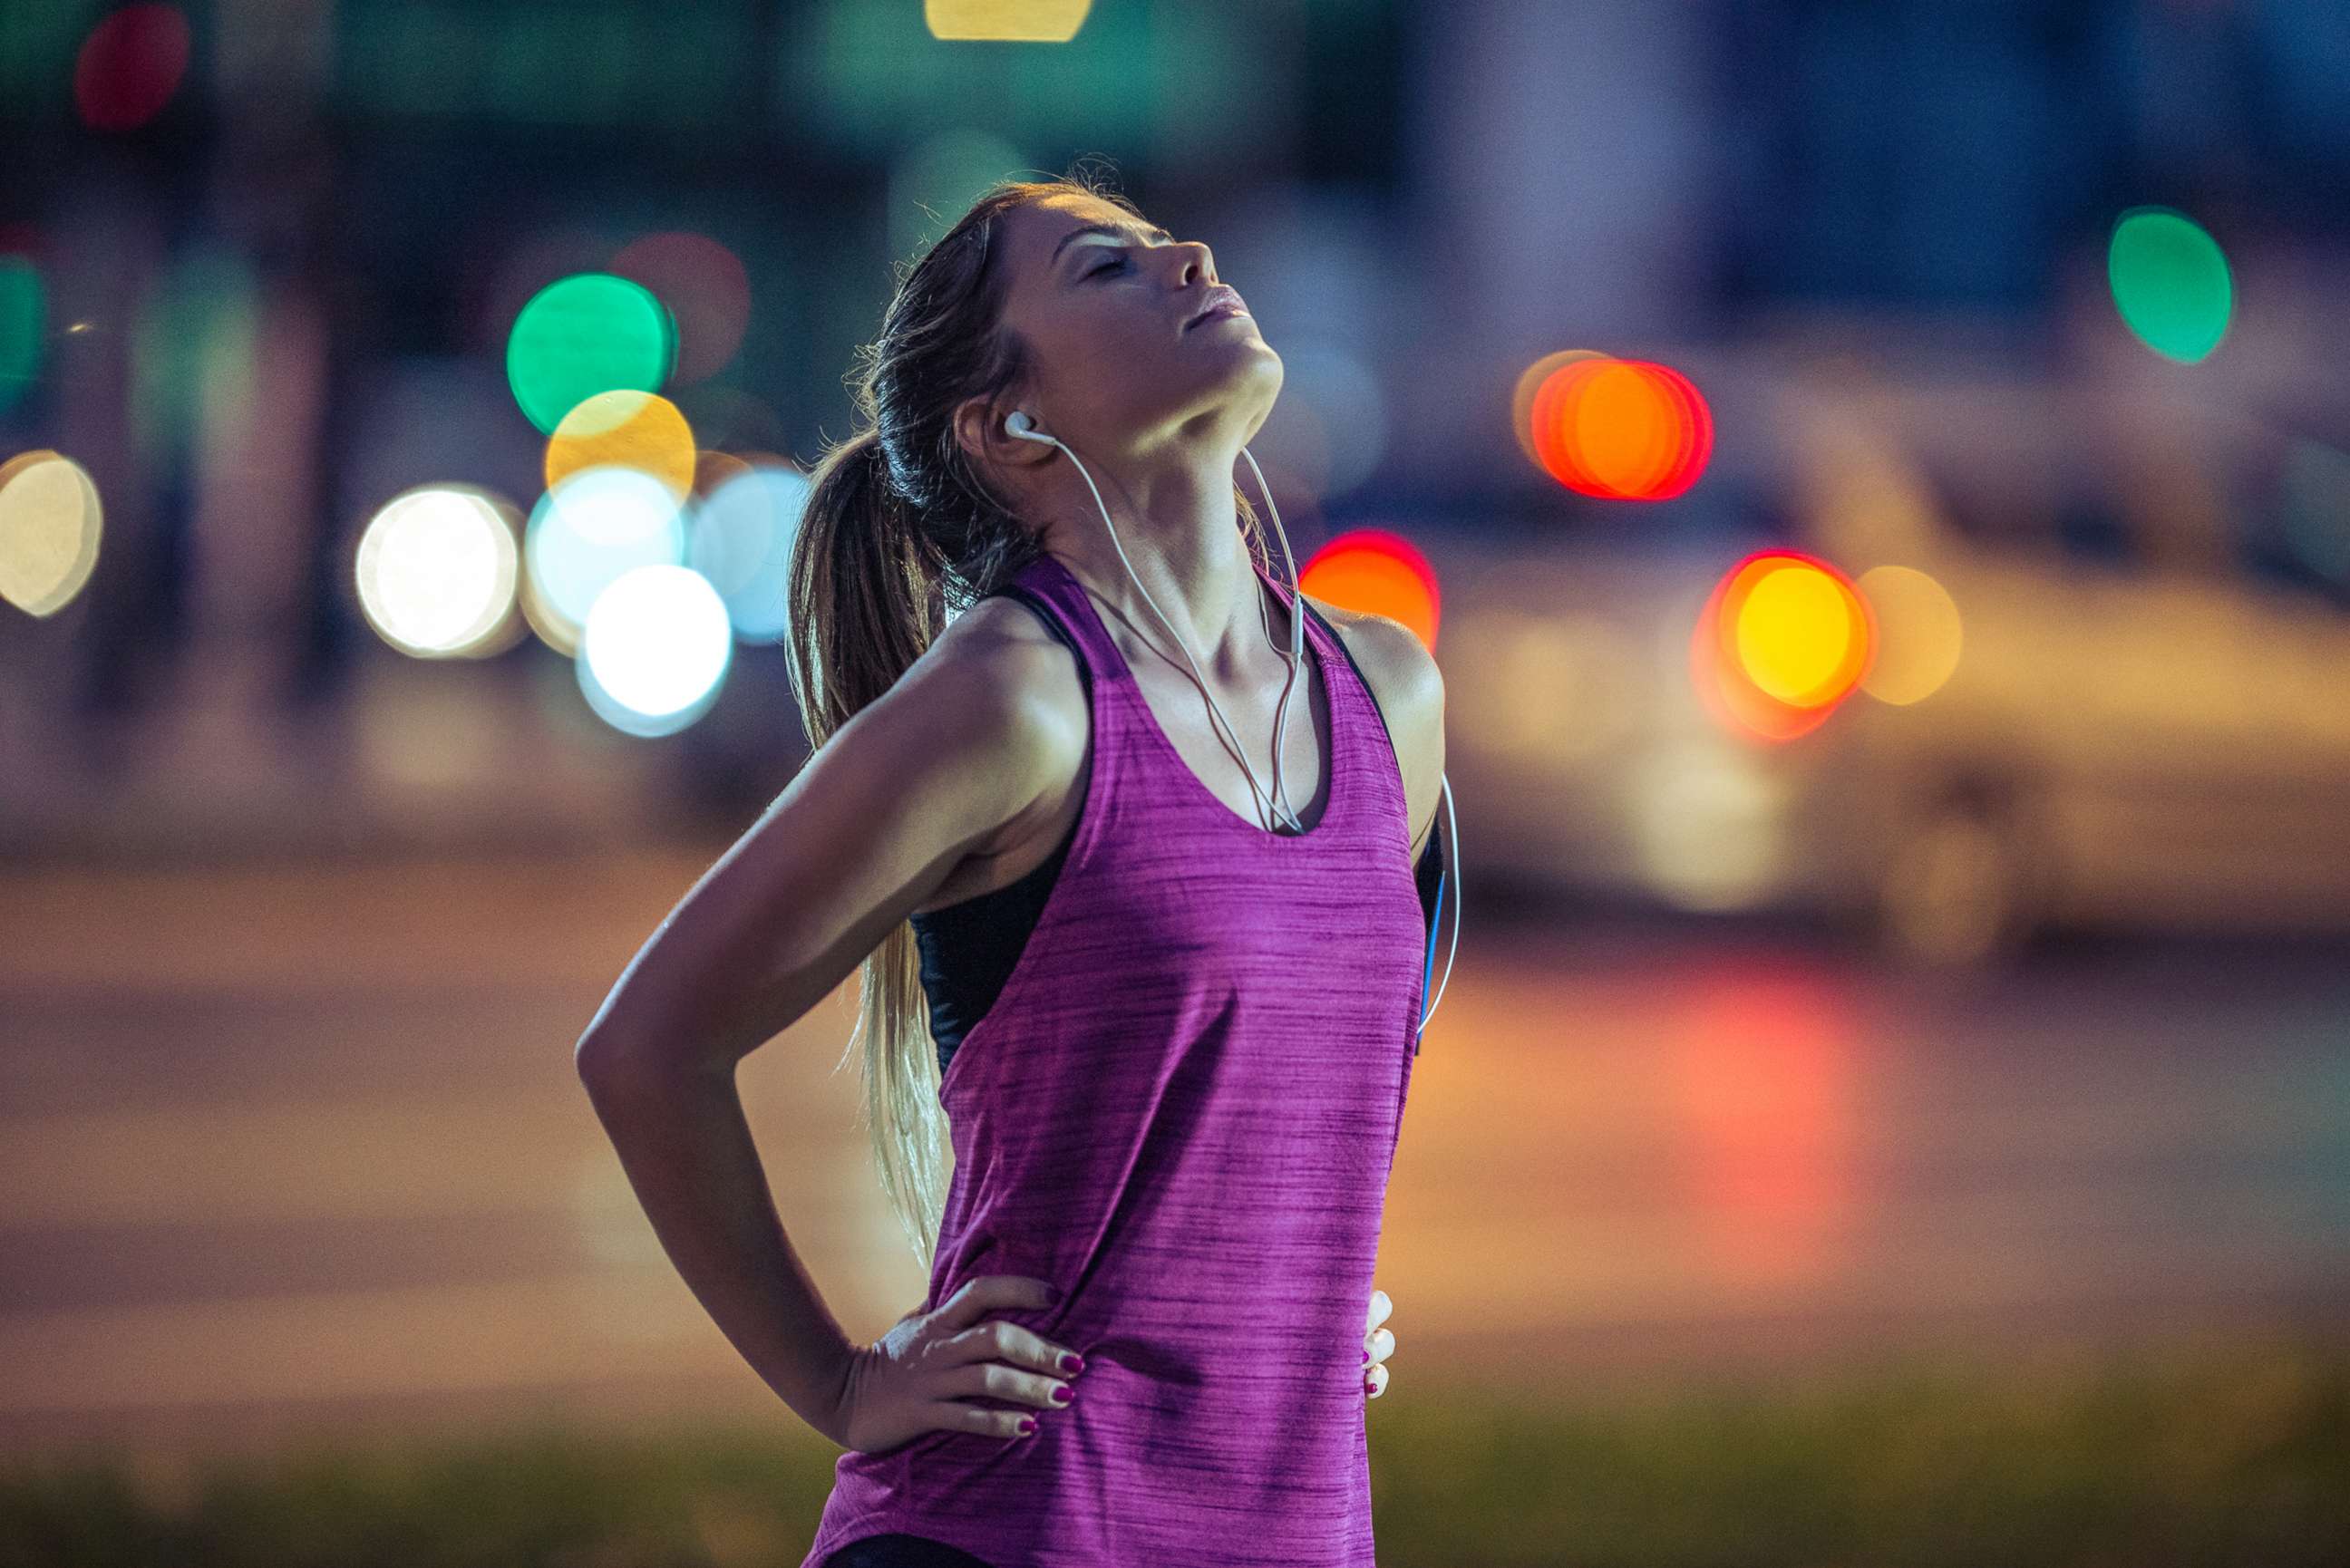 PHOTO: A young woman is pictured catching her breath after a running session in this undated stock photo.